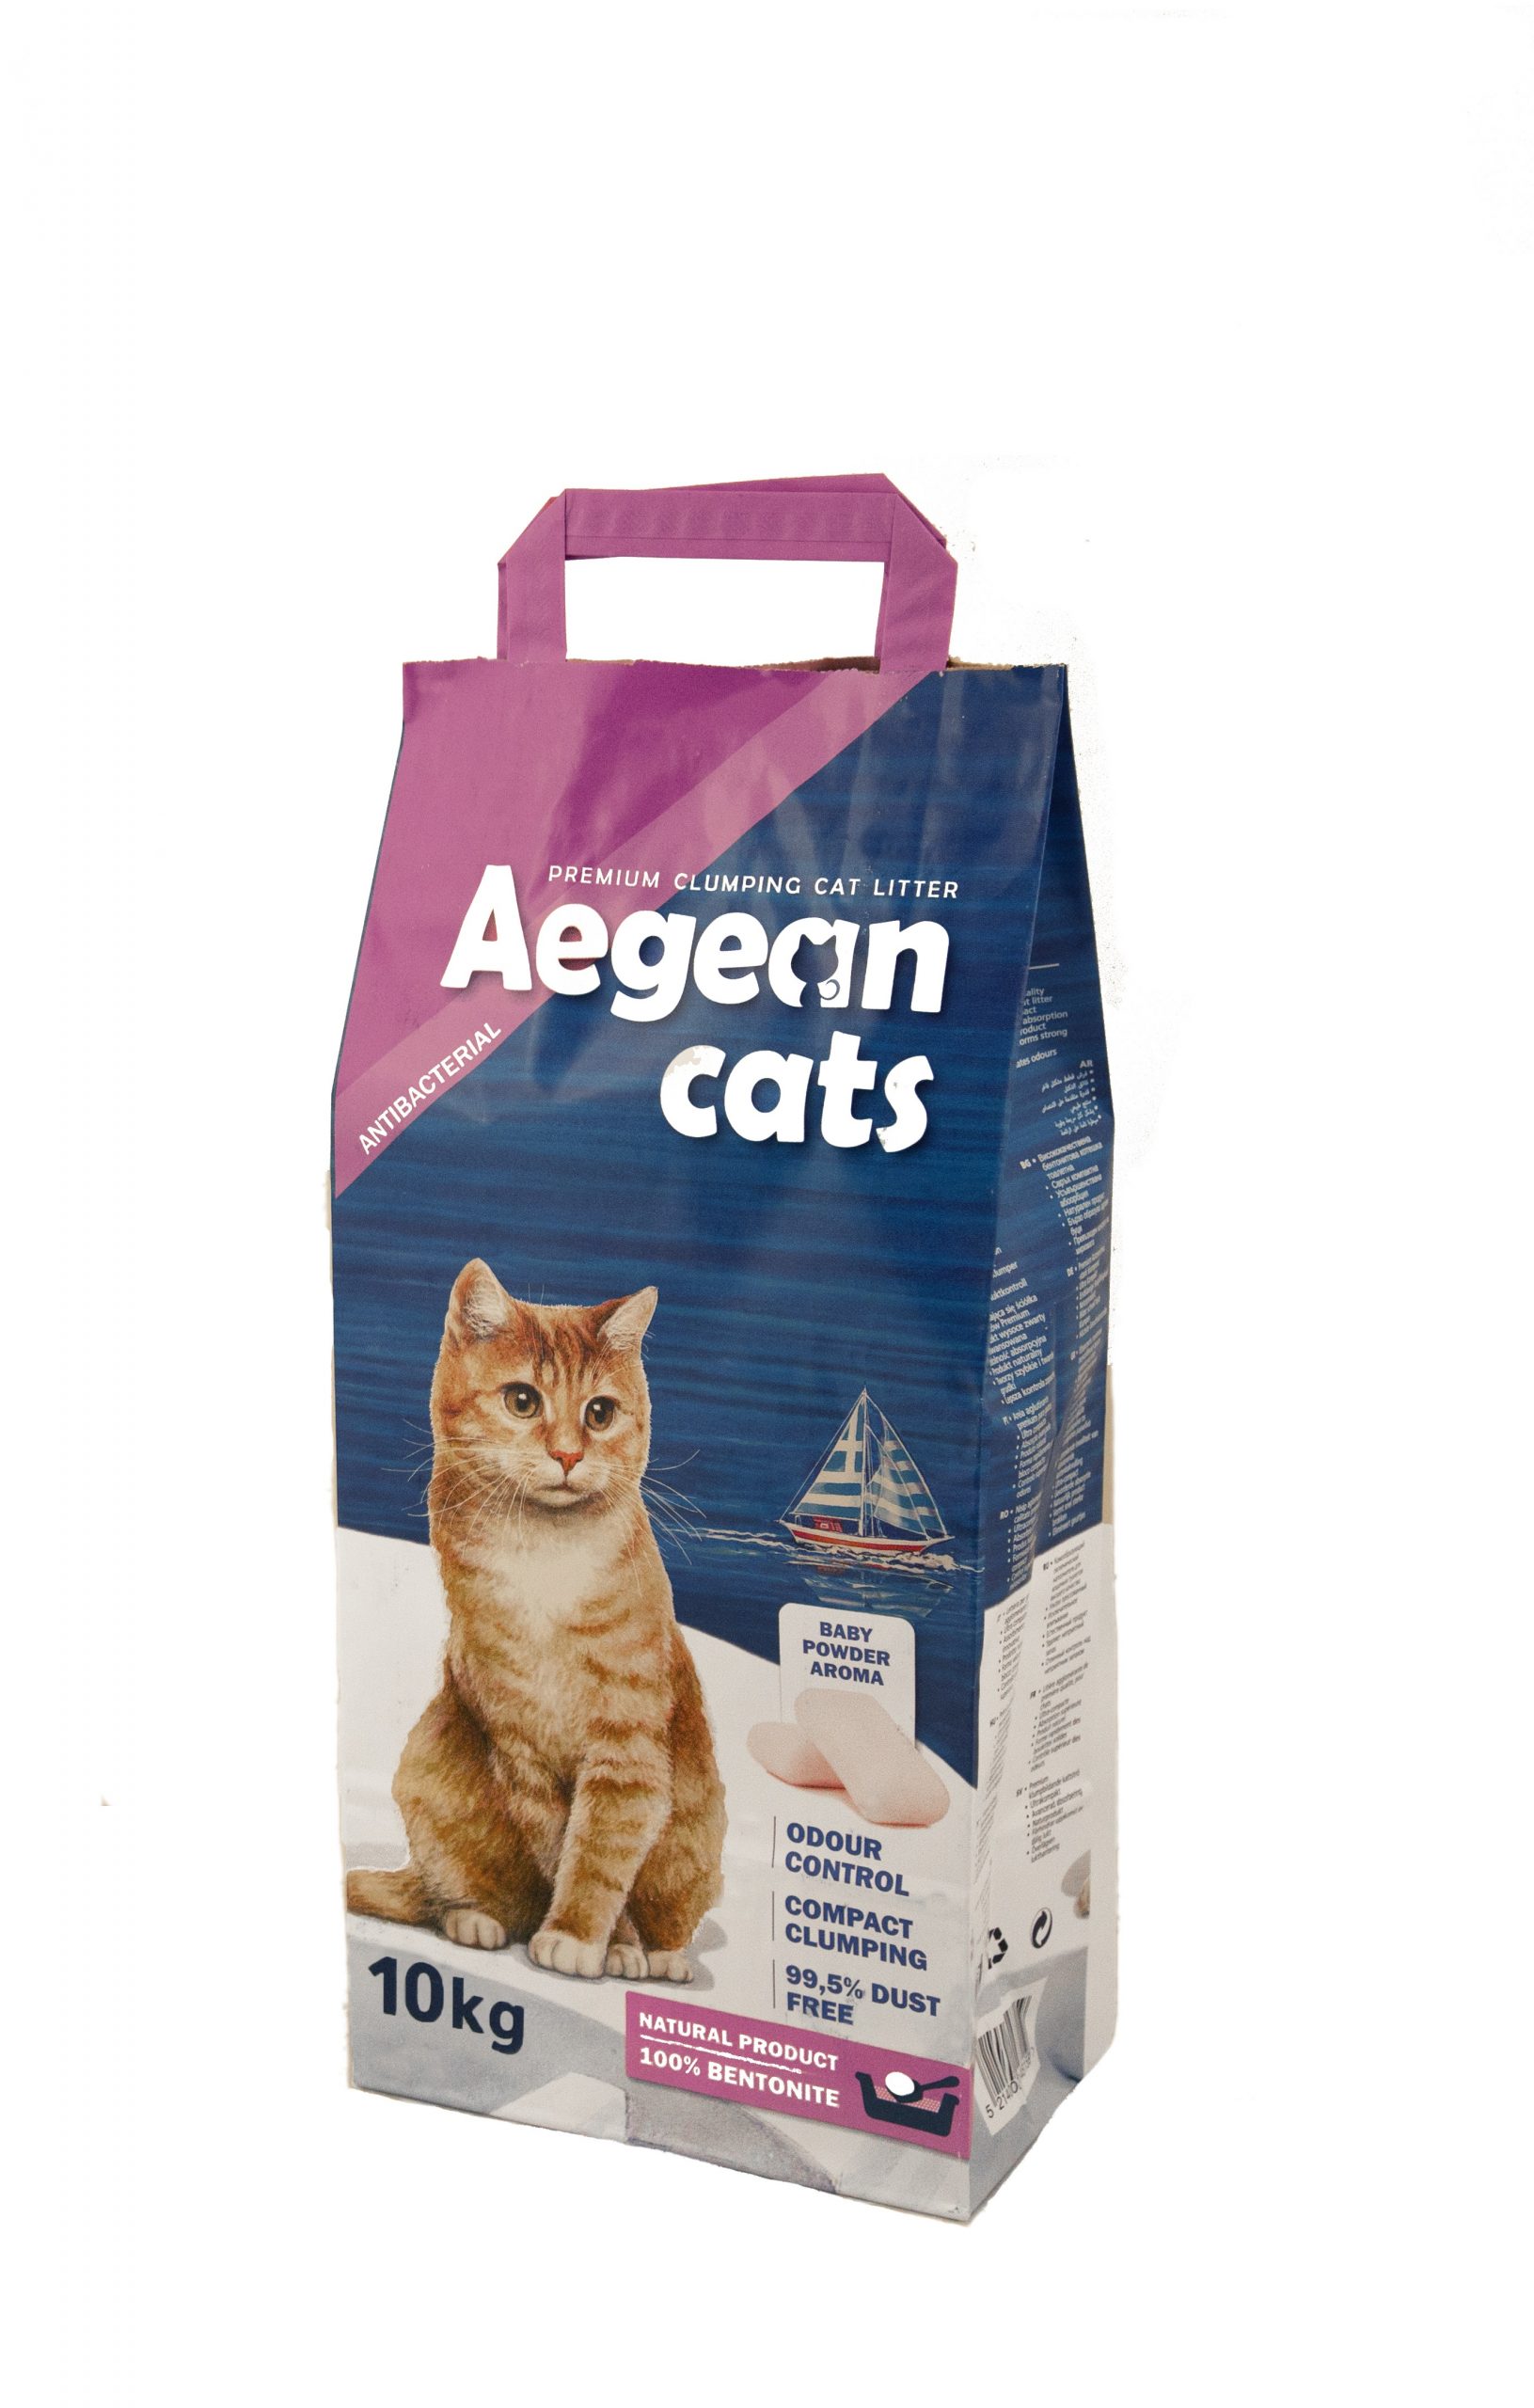 Aegean Cats Natural Cat Litter (10kg)perfumed with baby powder 